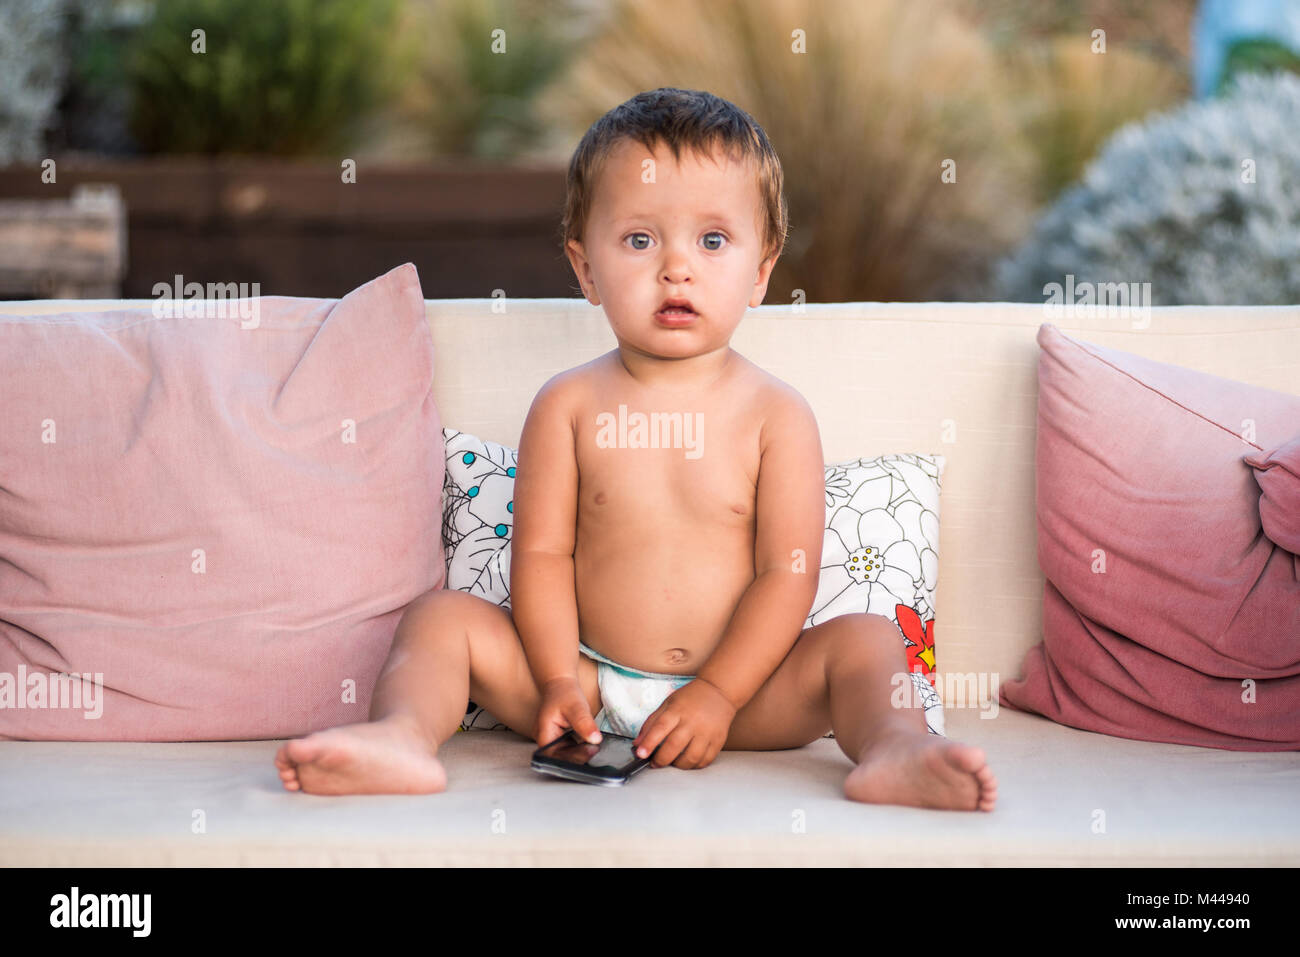 Baby boy holding smartphone looking at camera Stock Photo